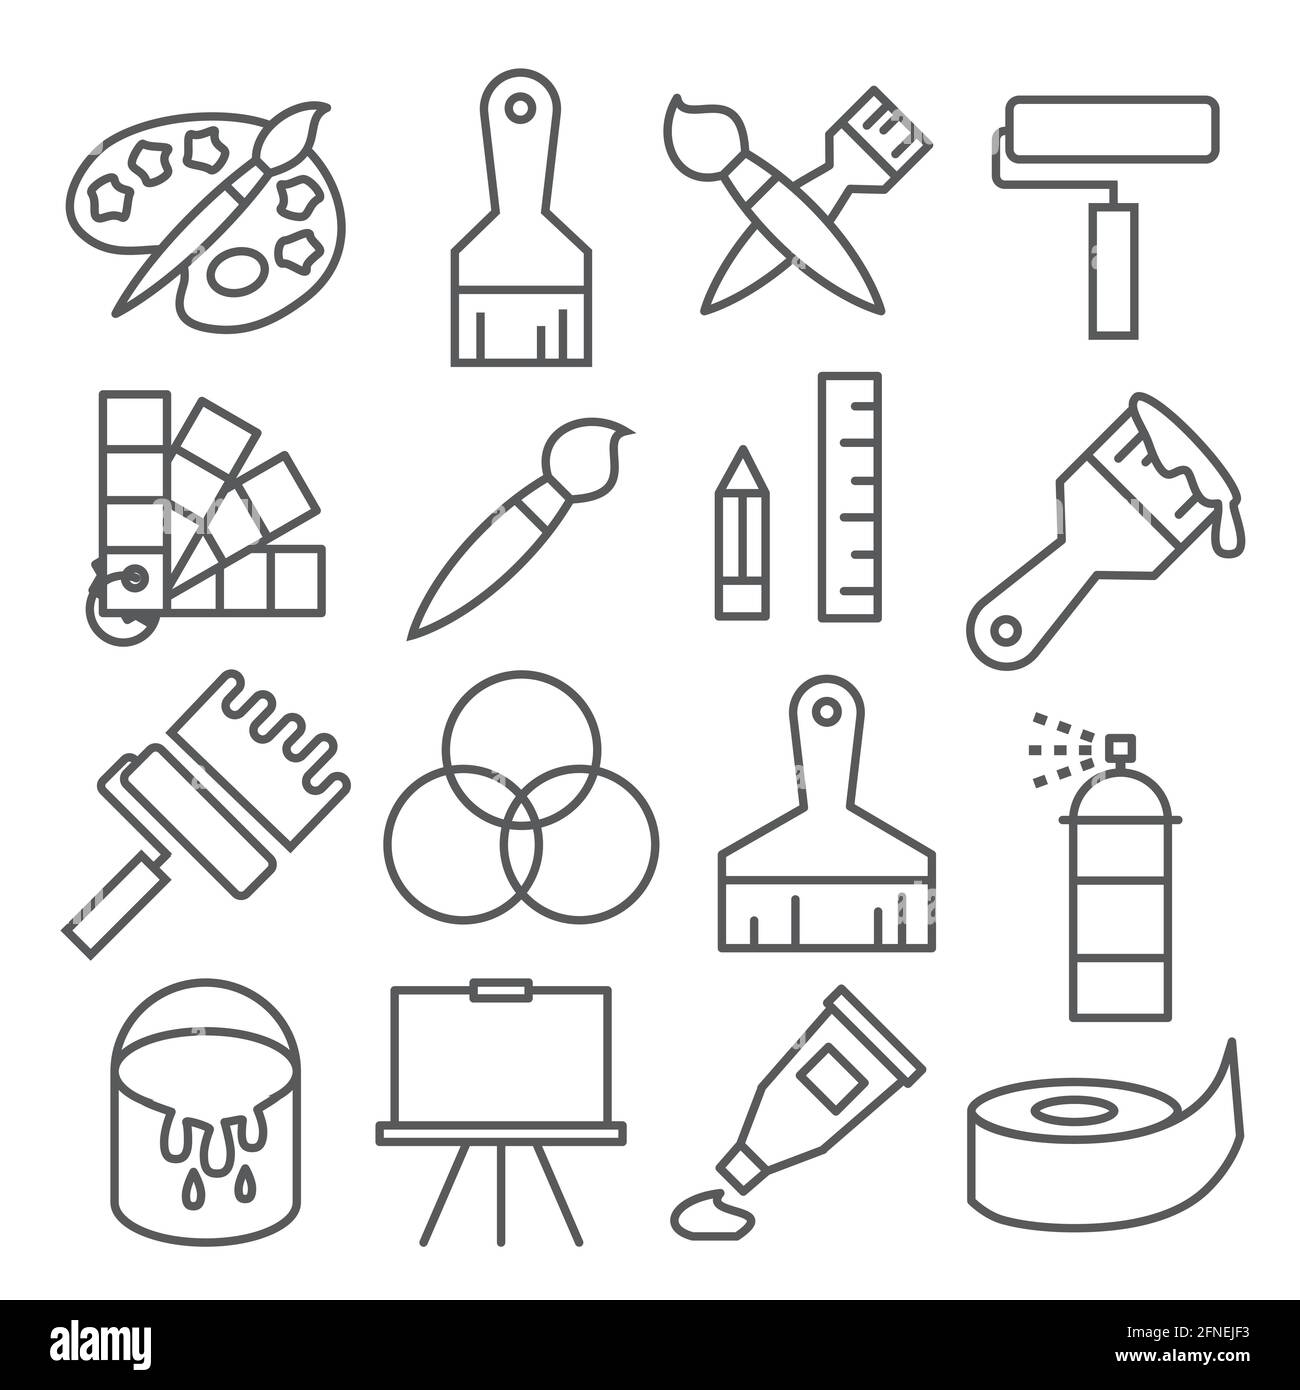 Painting and drawing line icons on white background Stock Vector